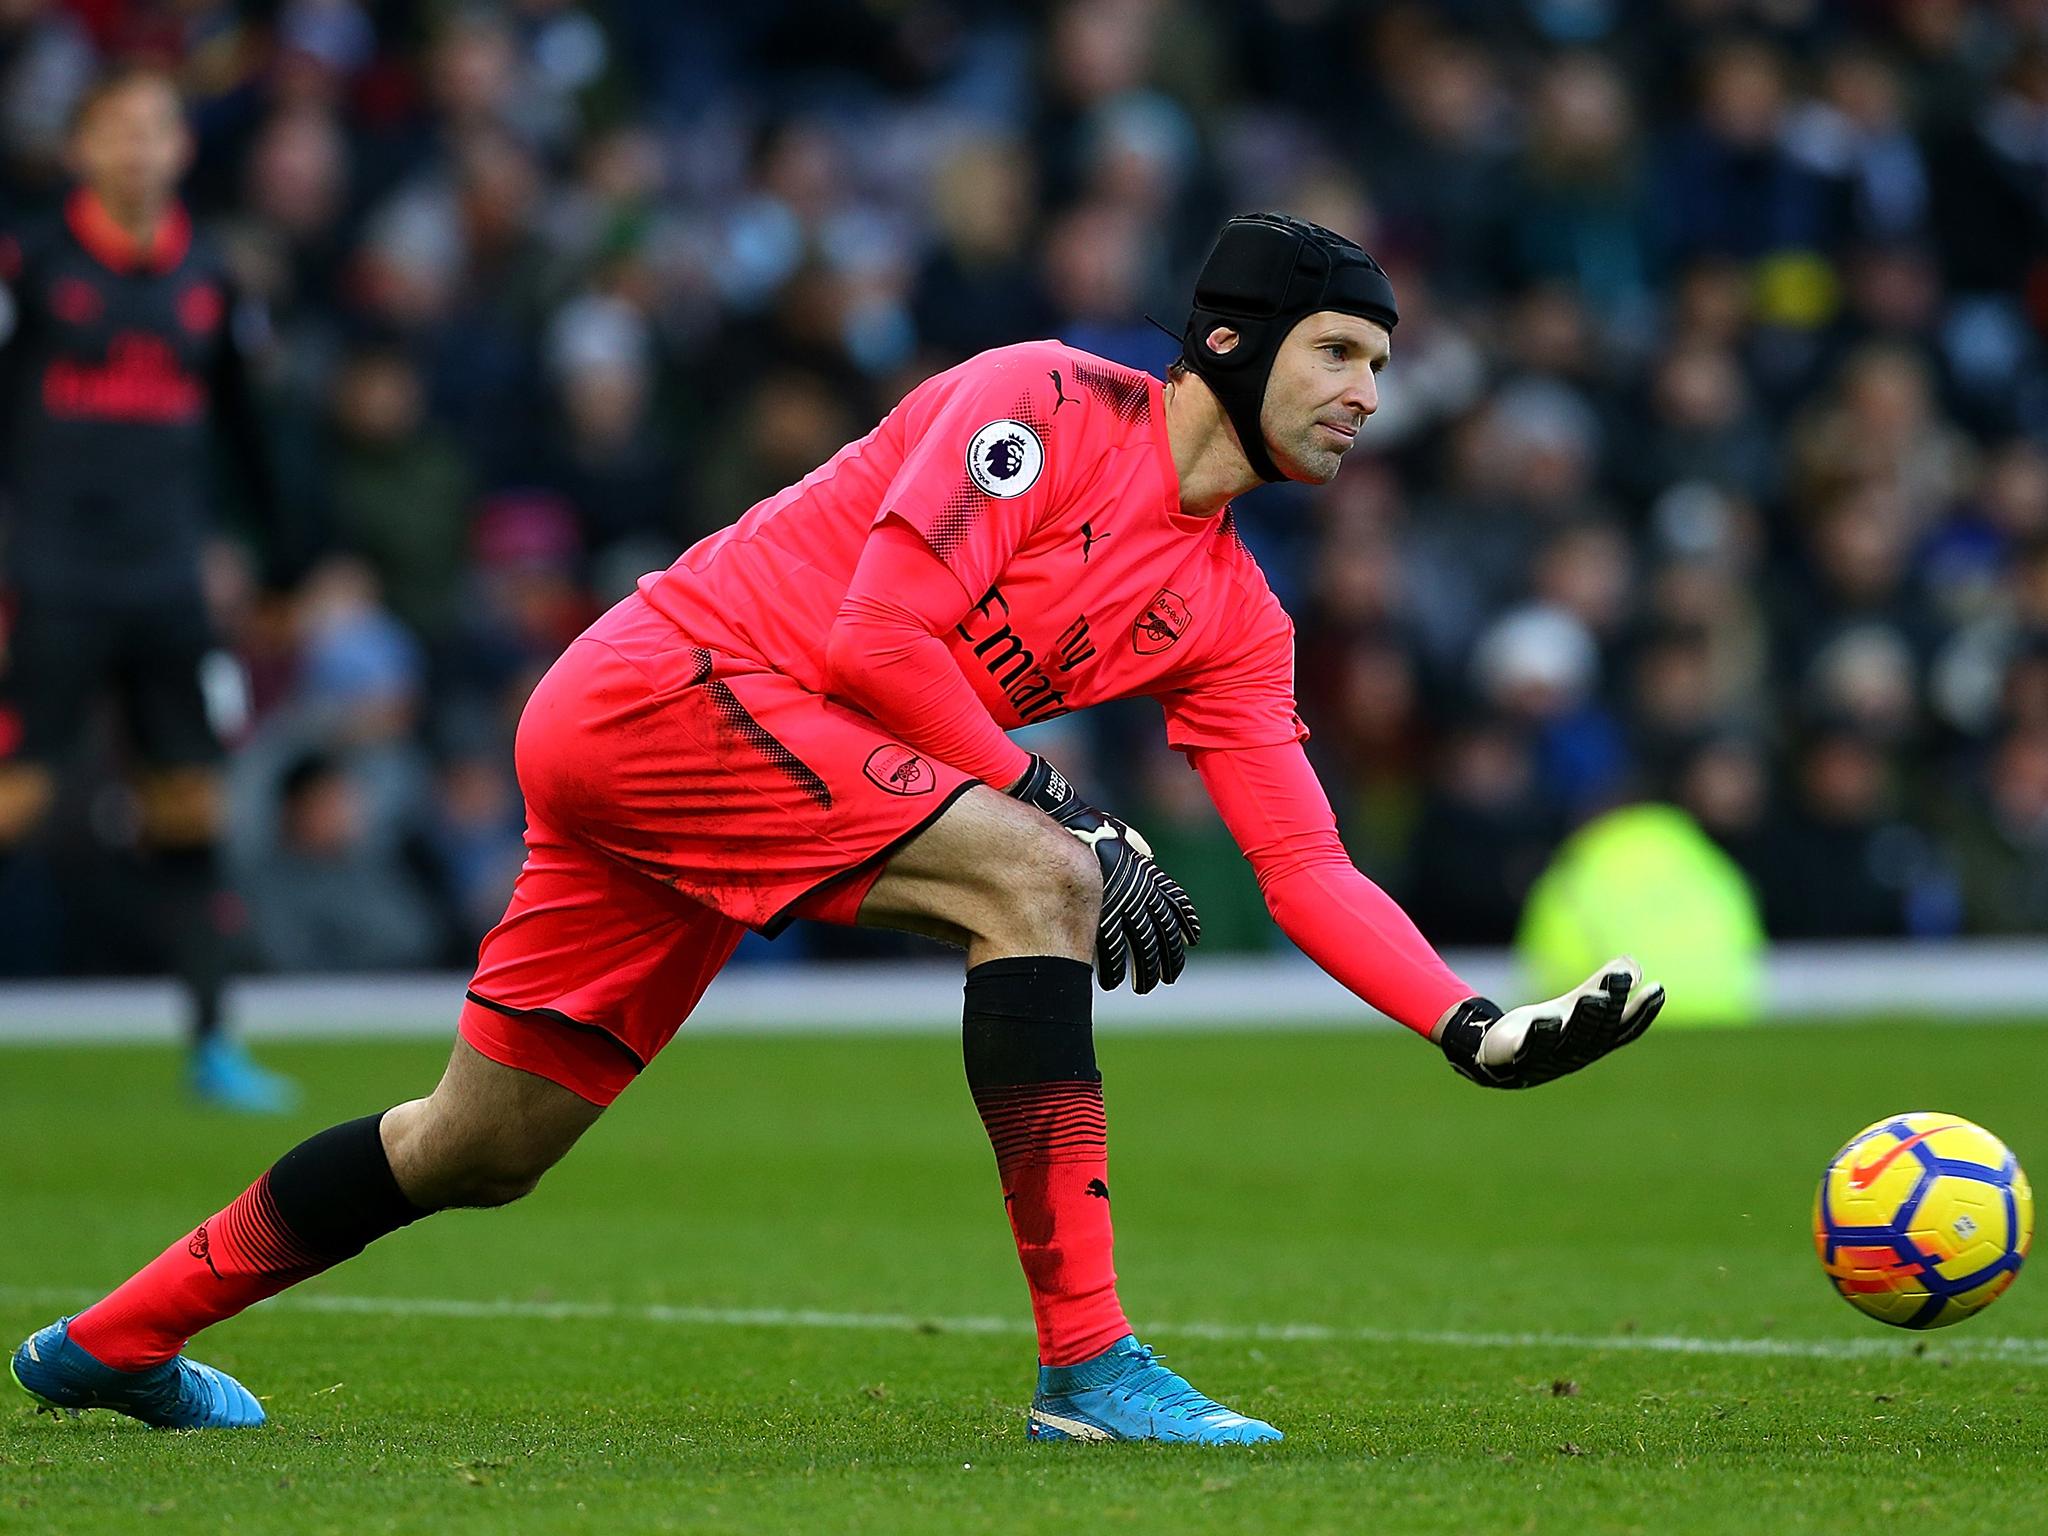 Petr Cech believes England must improve their away form to challenge for the Premier League title